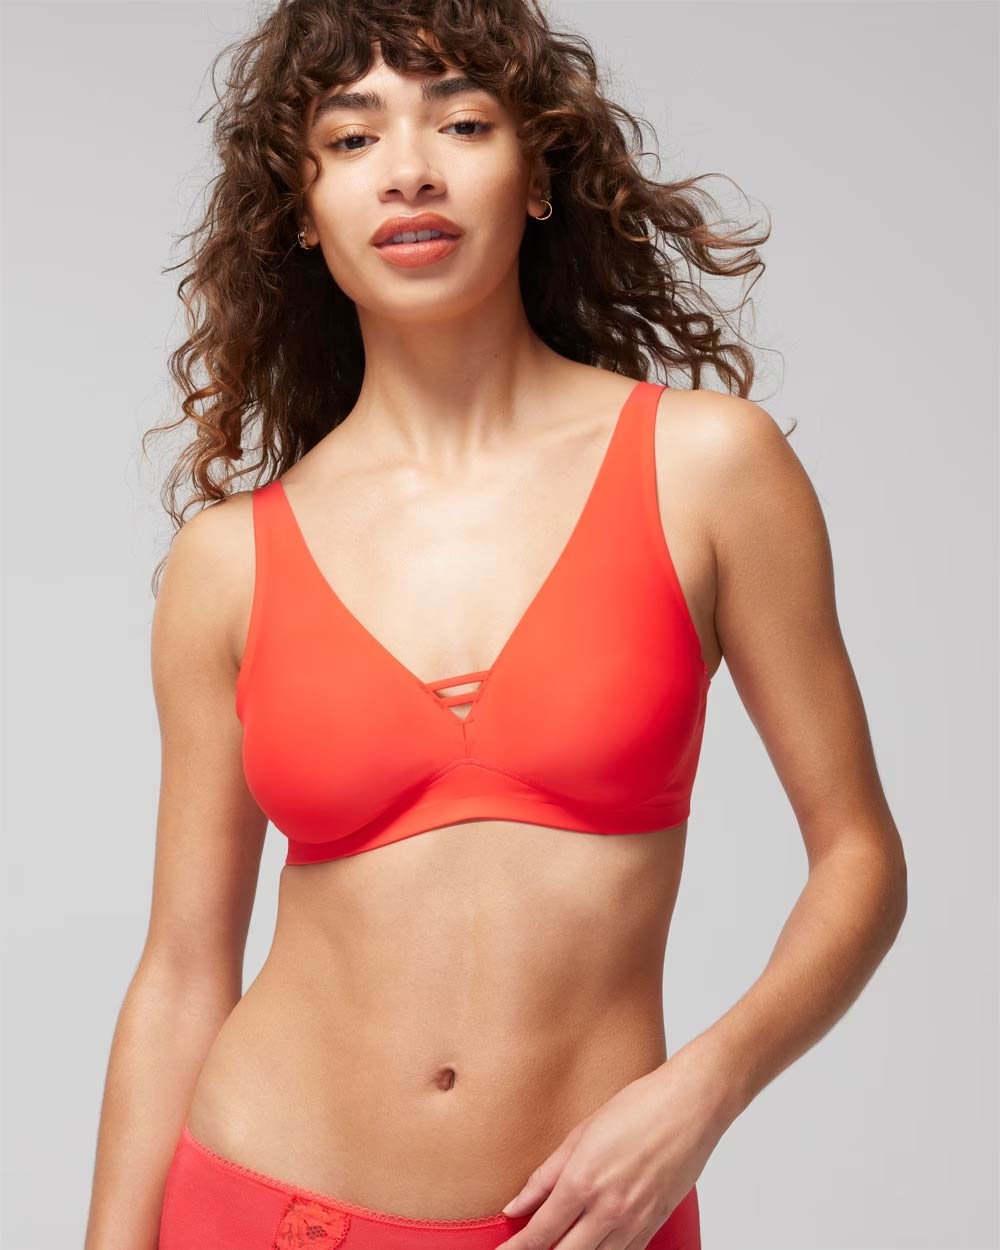 Looking for Summer Bras? Enjoy our wireless comfortable Summer Bra